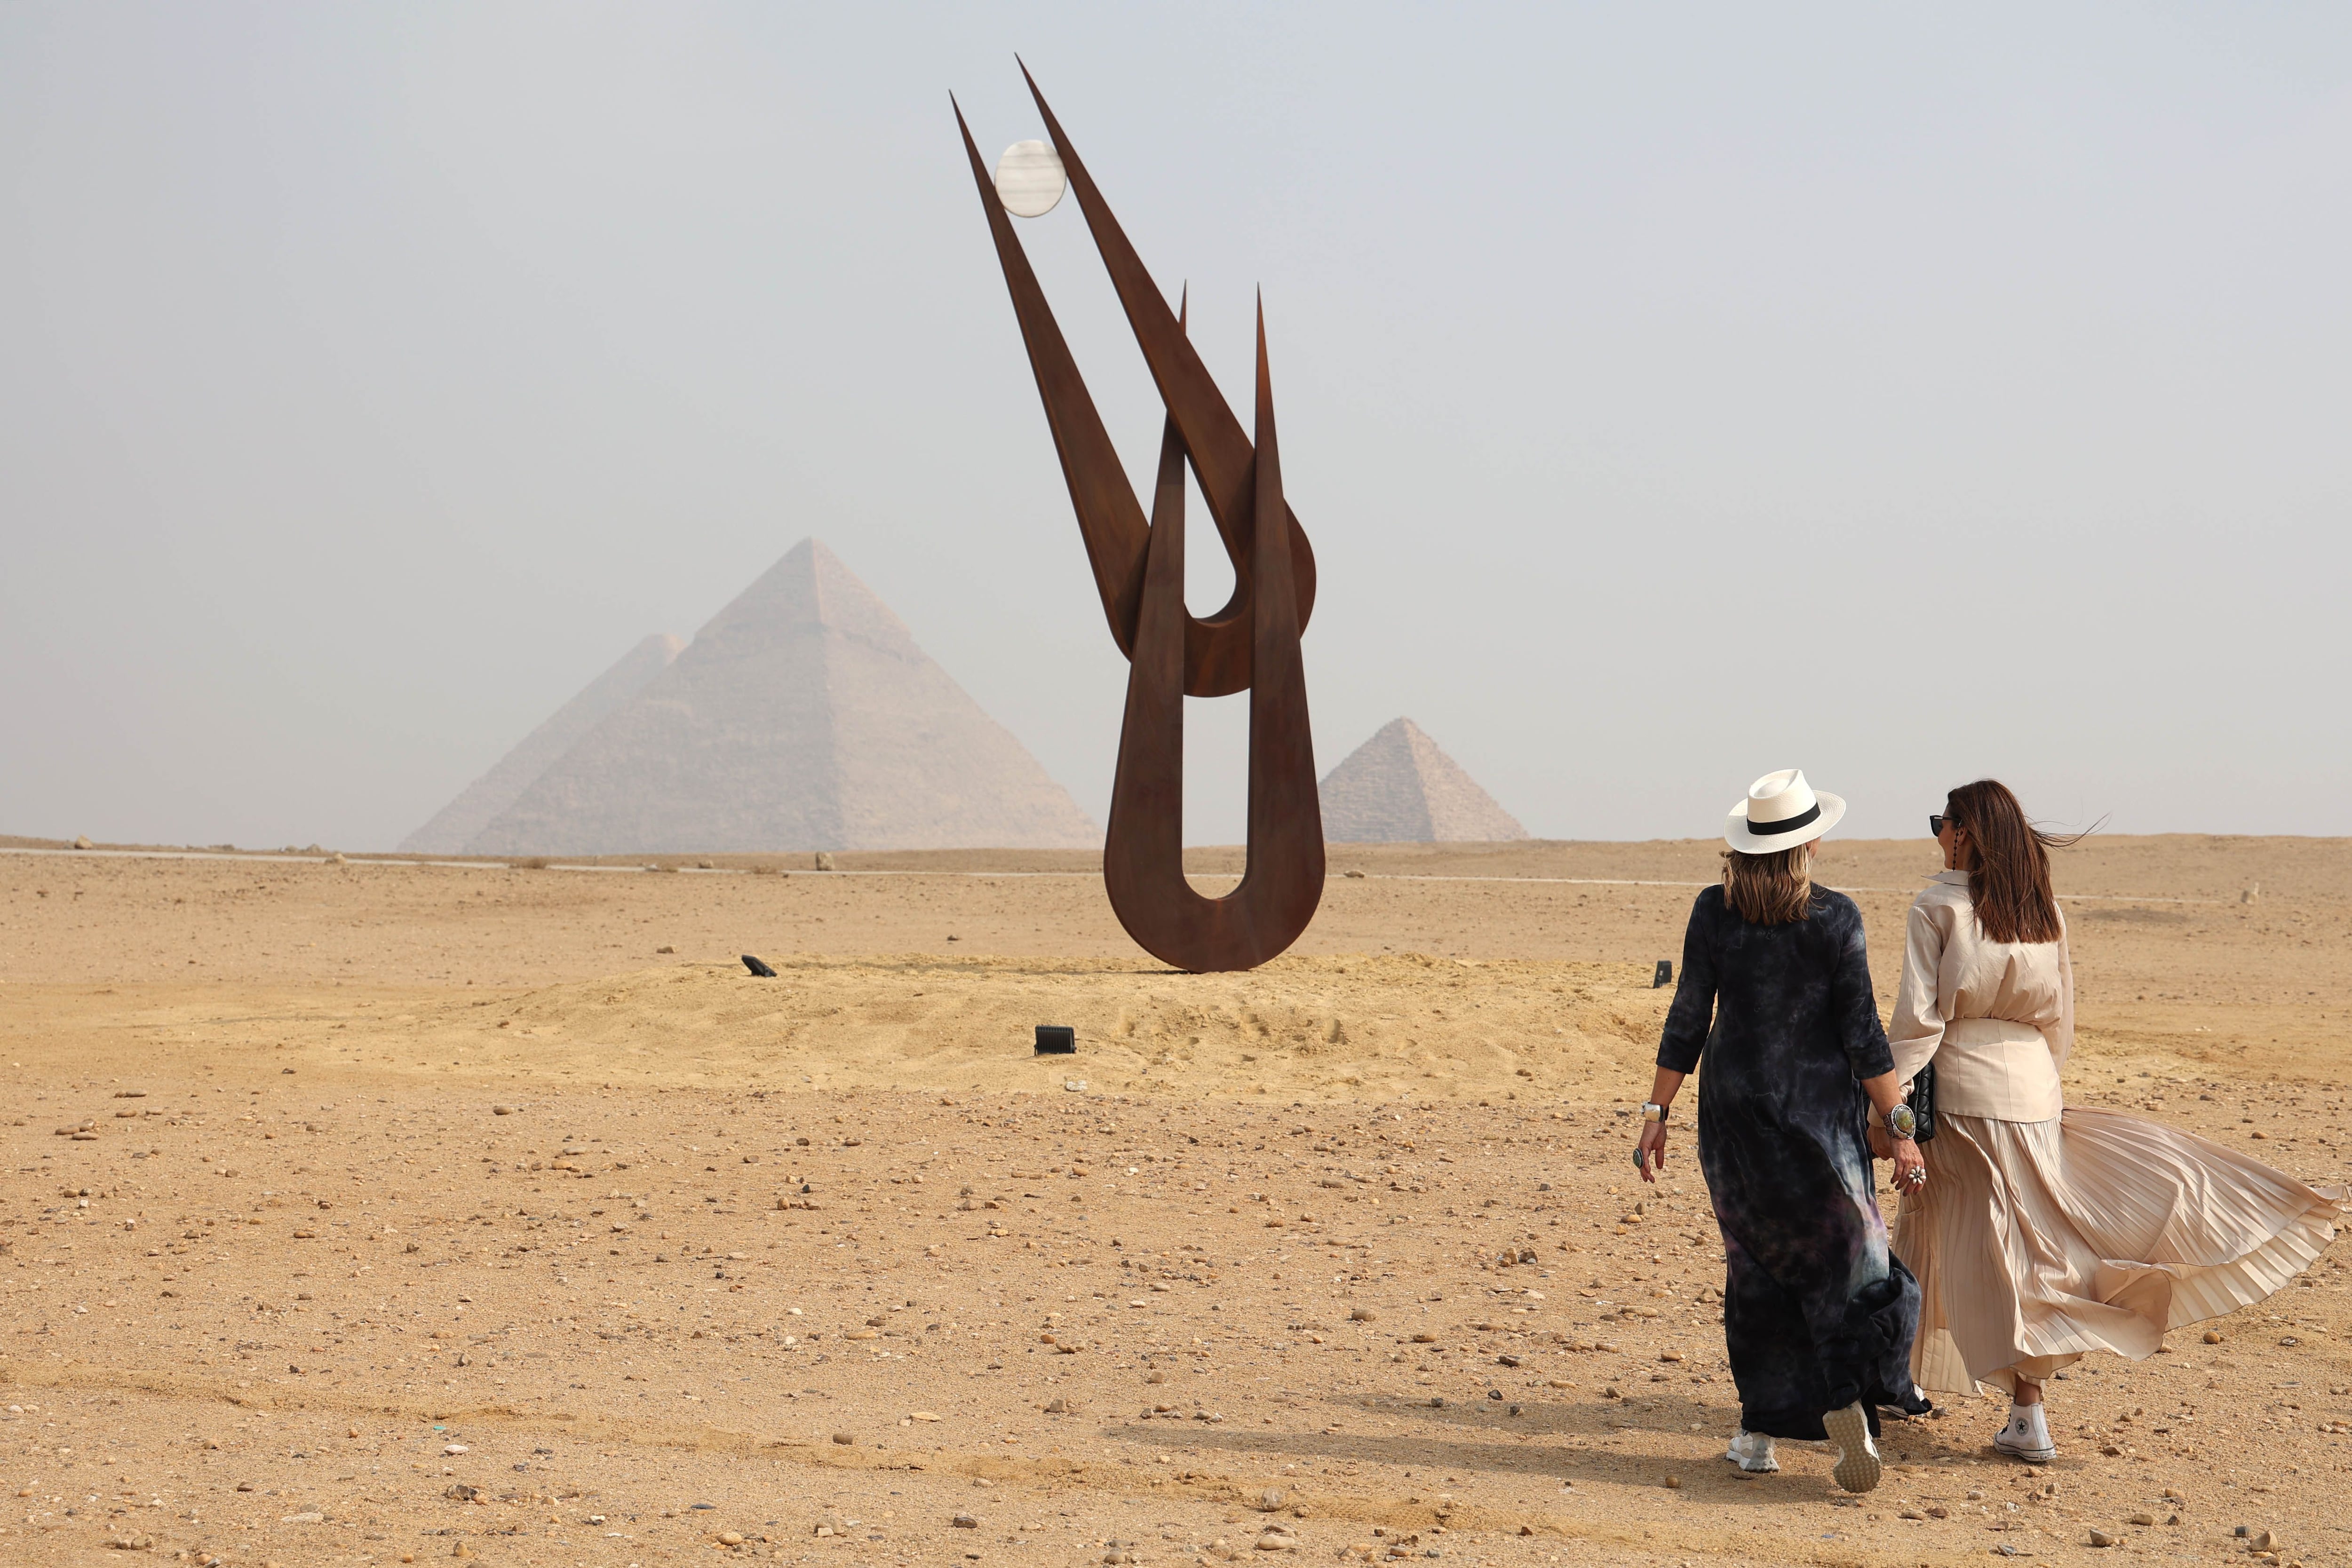 Cultuvator/Art D'Egypte is officially announcing our annual talk